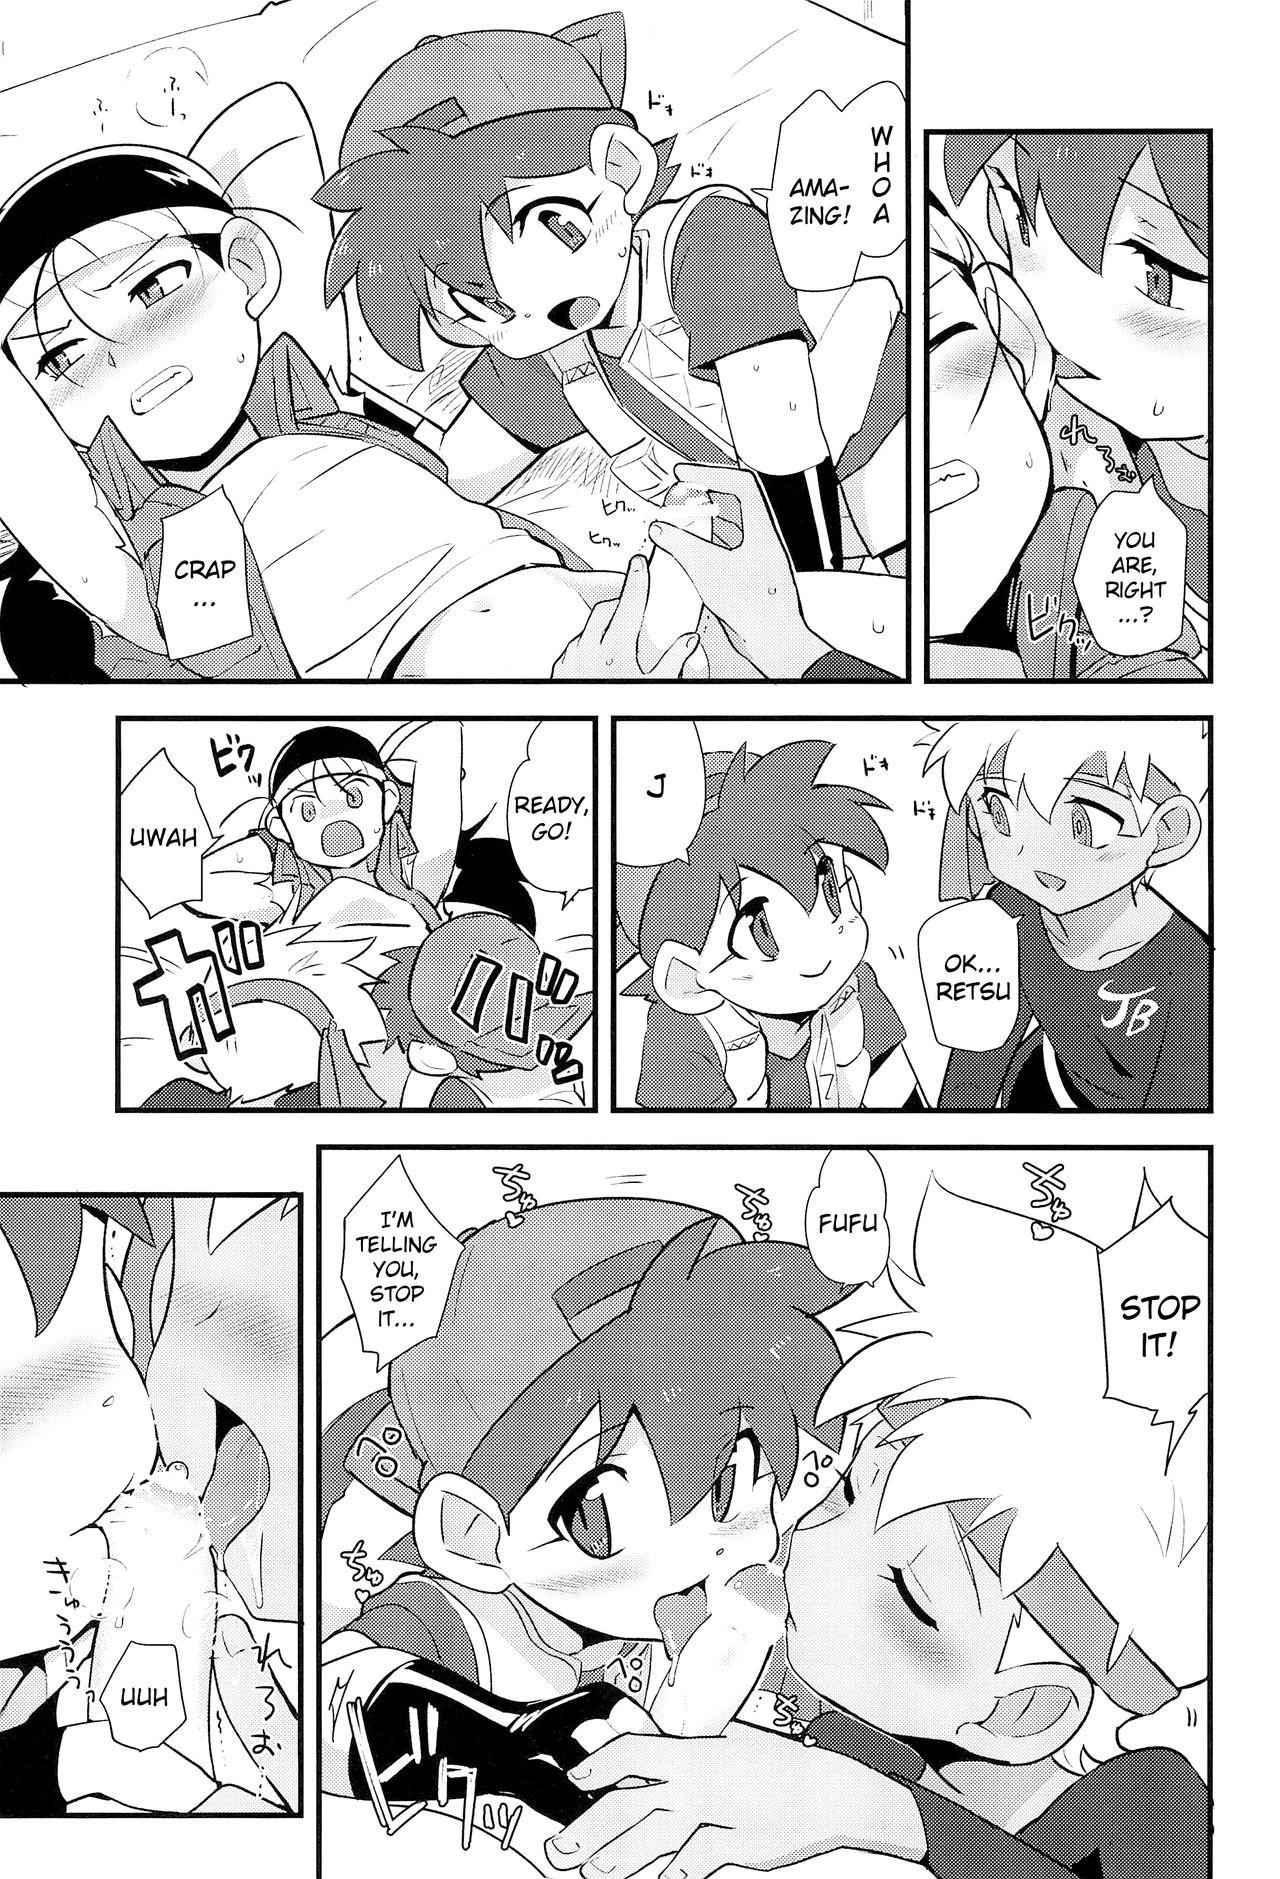 Spanking Try Shichau? | Wanna Try It? - Bakusou kyoudai lets and go Chat - Page 6